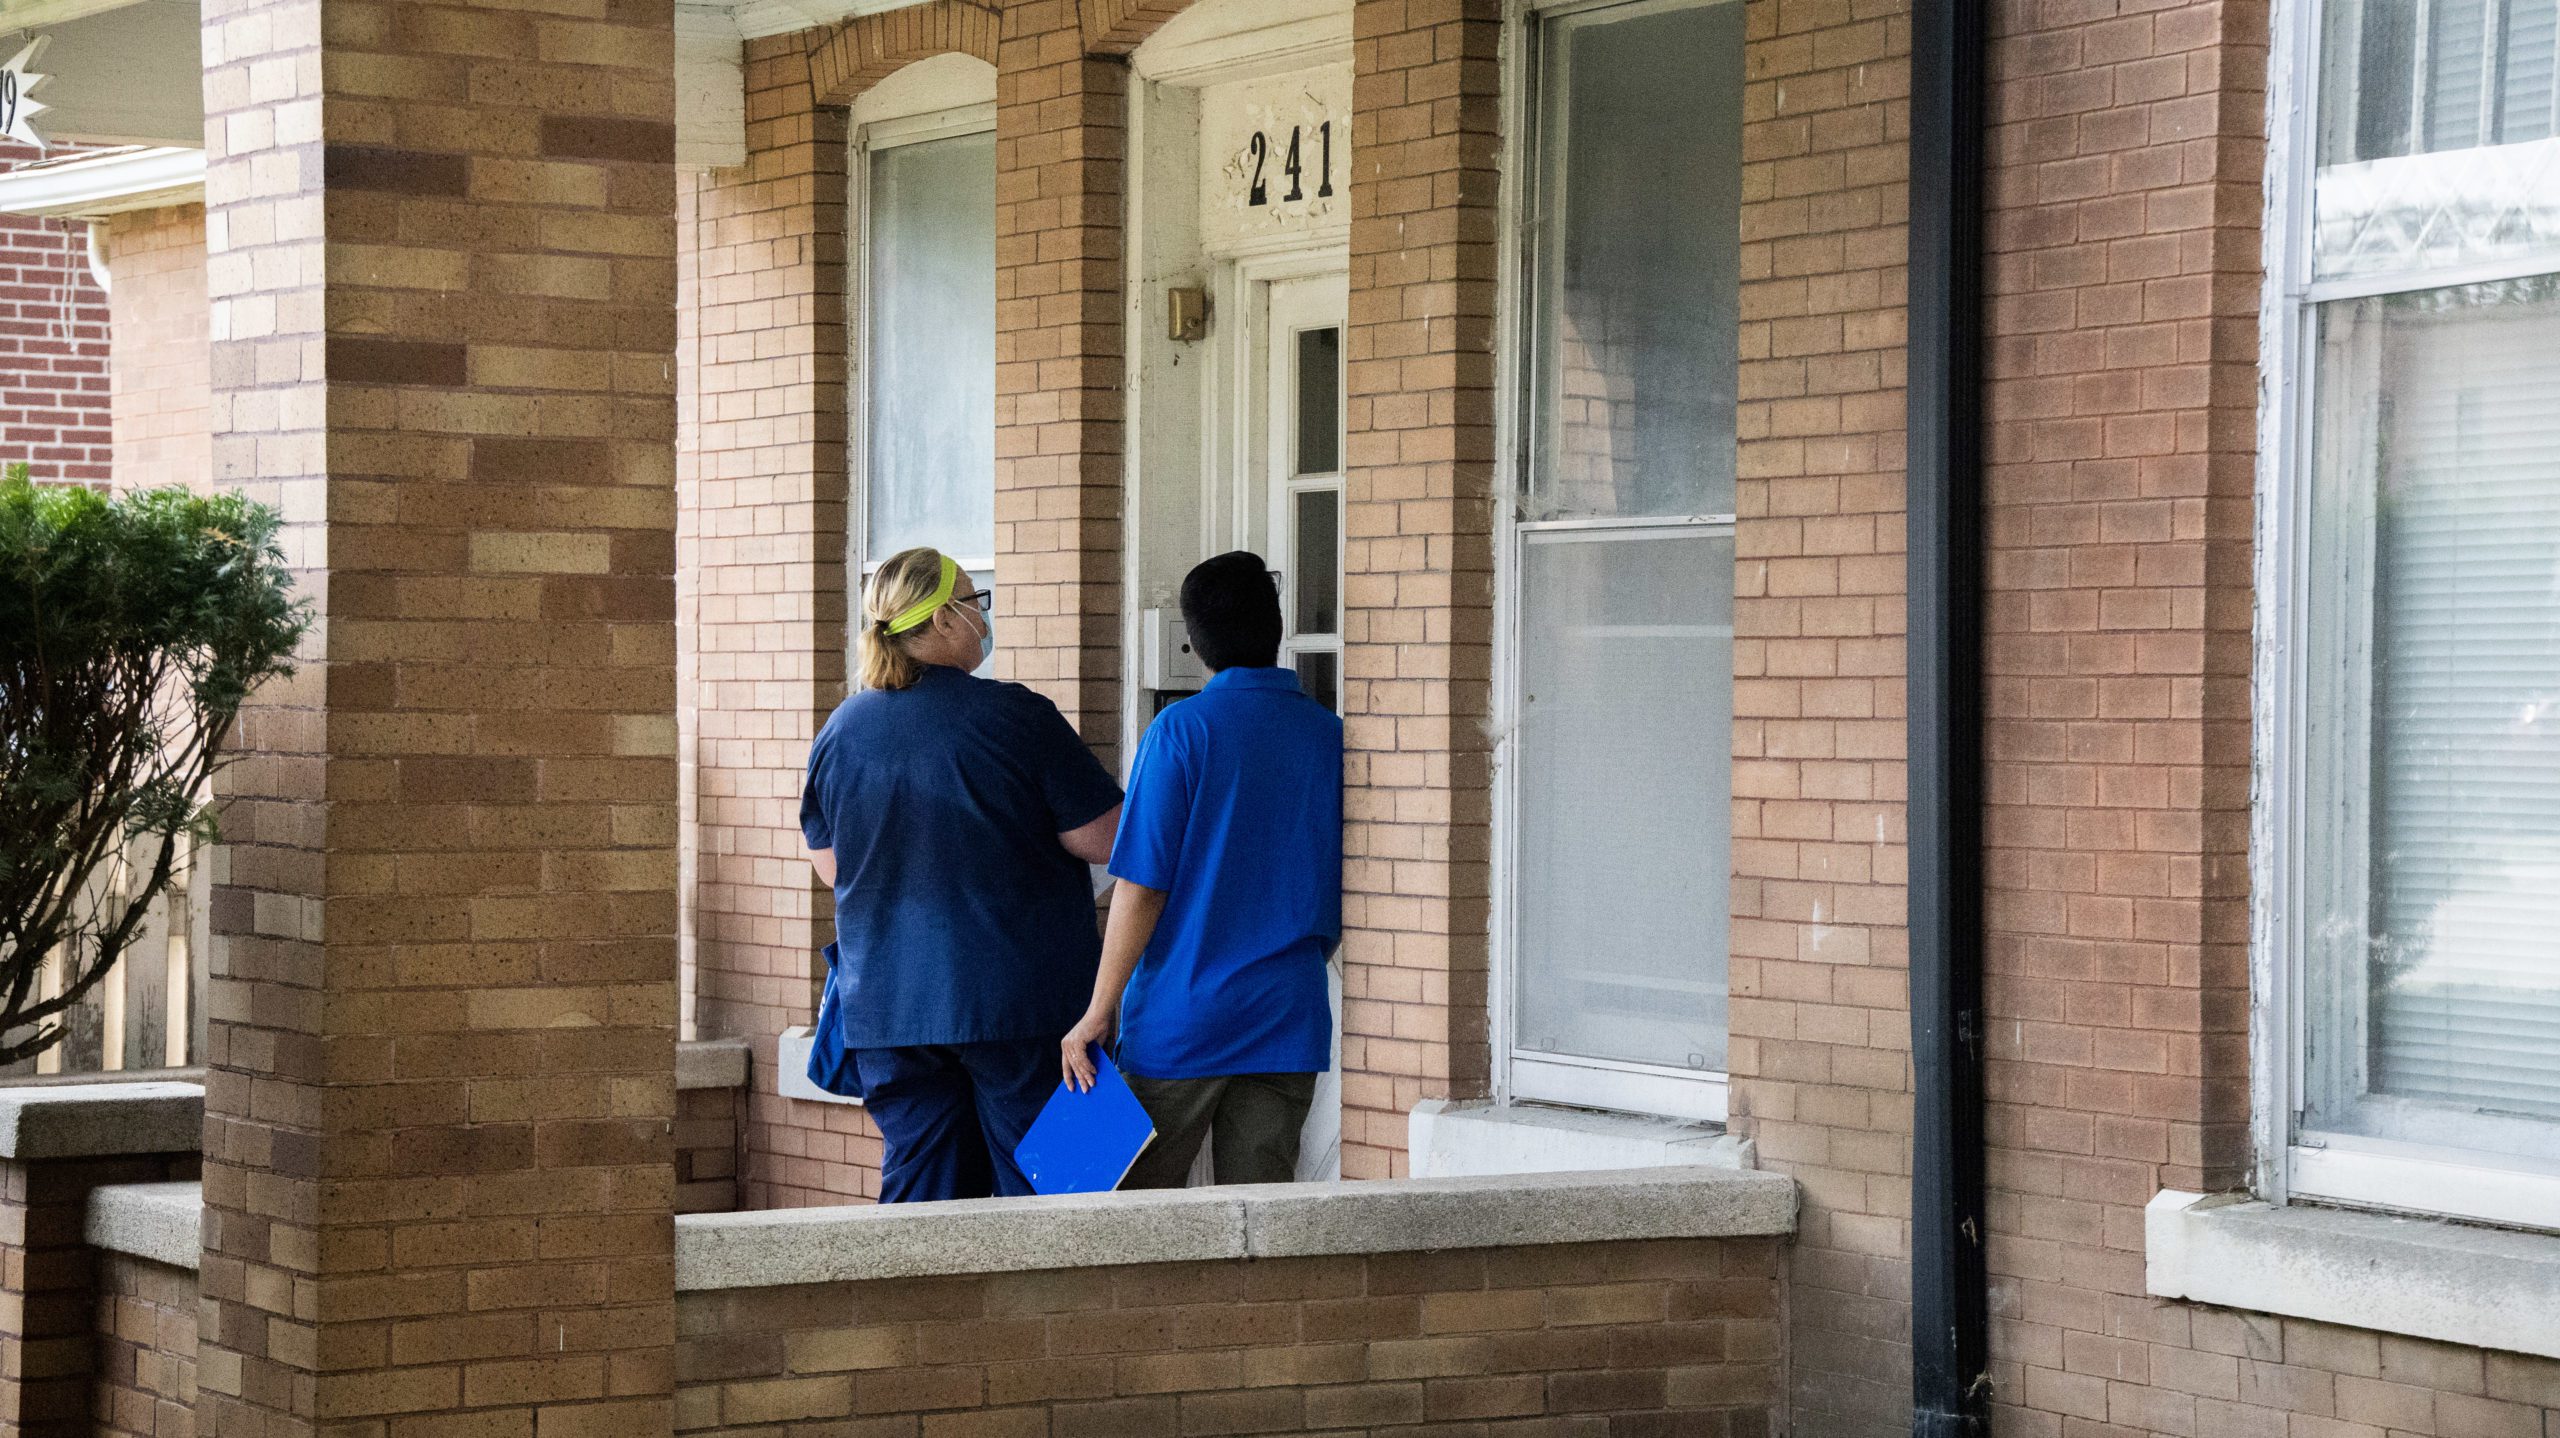 Mary McConnaughey and Eddie Nunez, One World vaccine outreach employees, knock on a door while walking through a South Omaha neighborhood to offer residents the COVID-19 vaccine. 